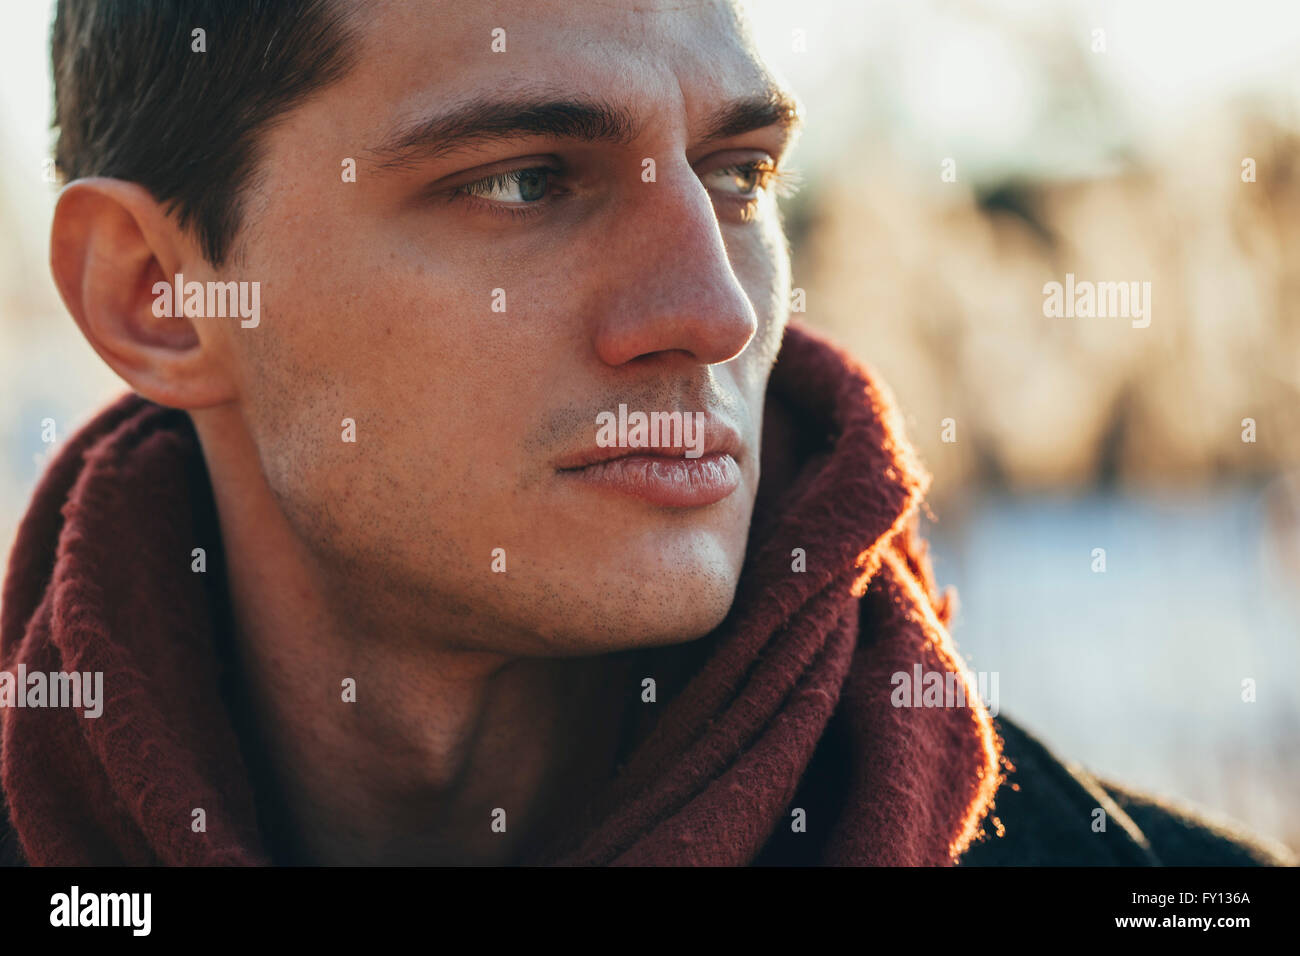 Close-up of young man standing outdoors Stock Photo